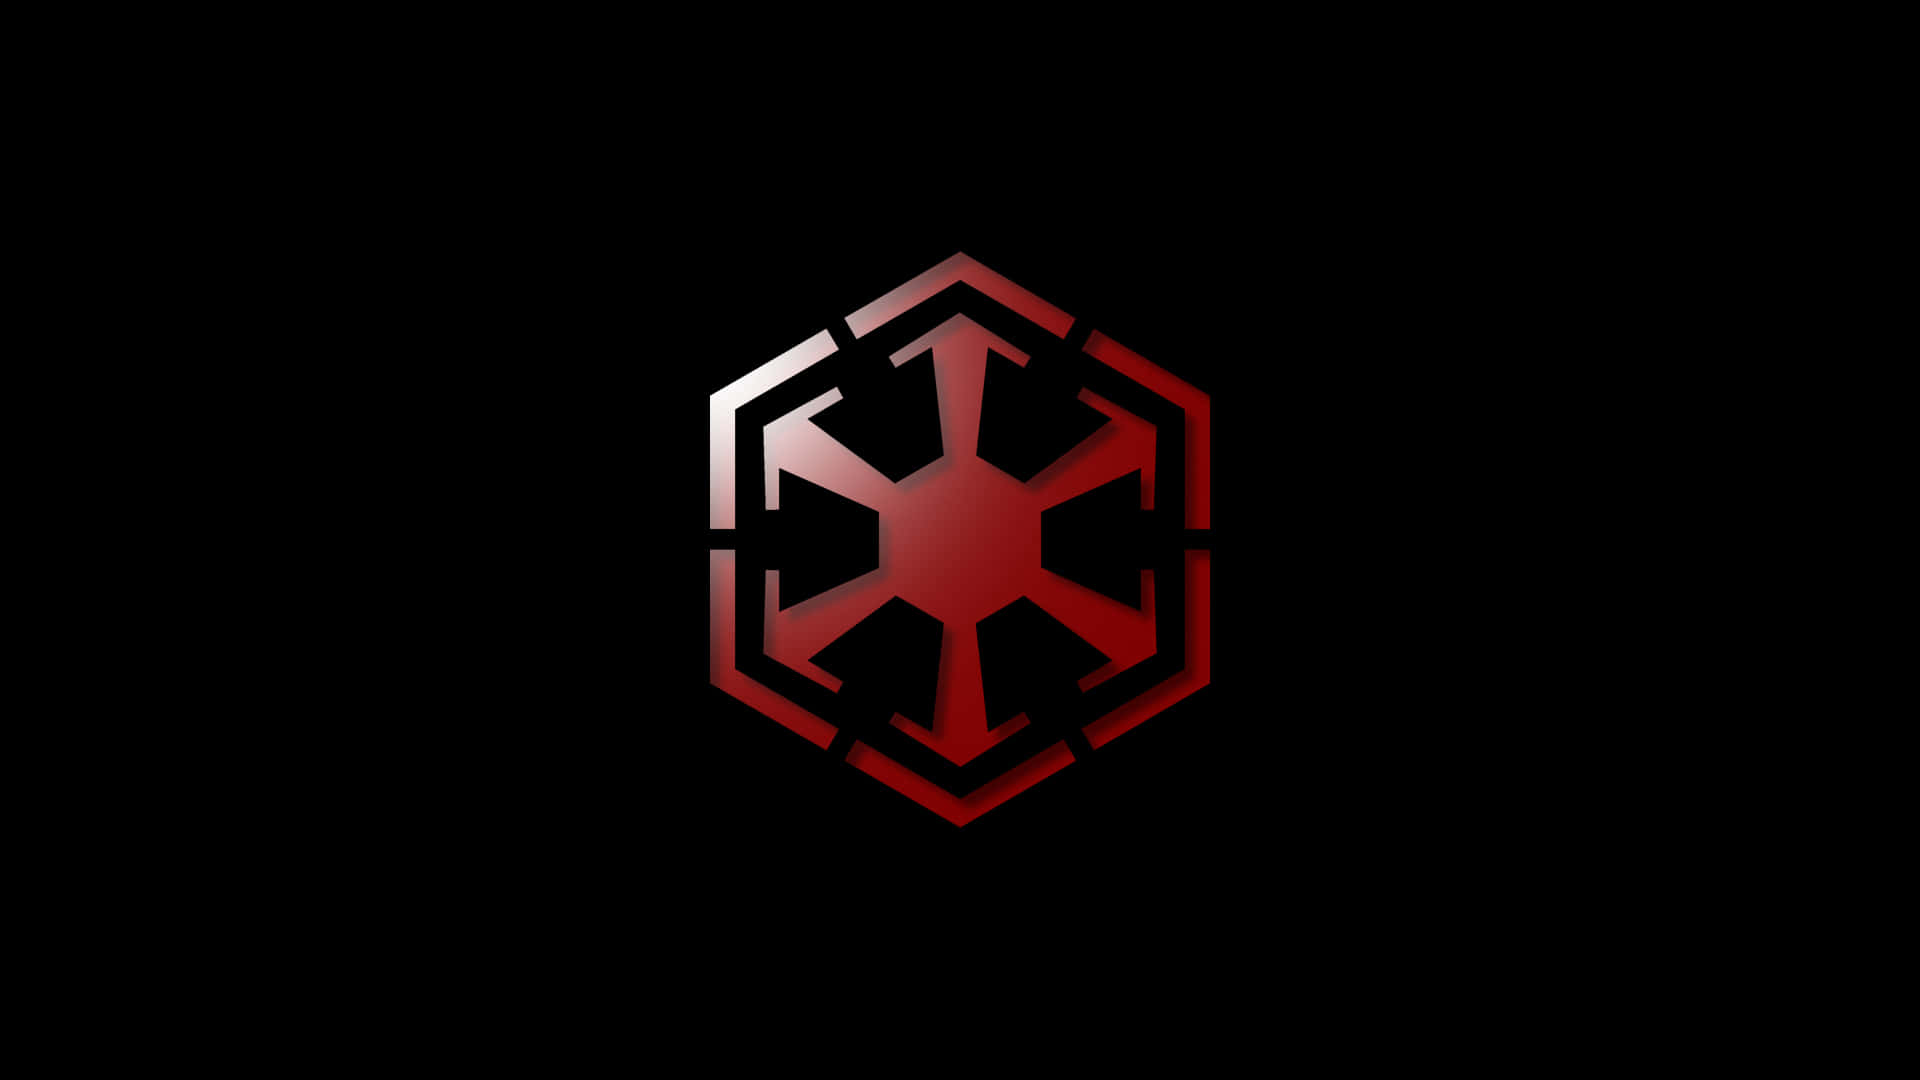 The Signs of the Power of The Empire Wallpaper